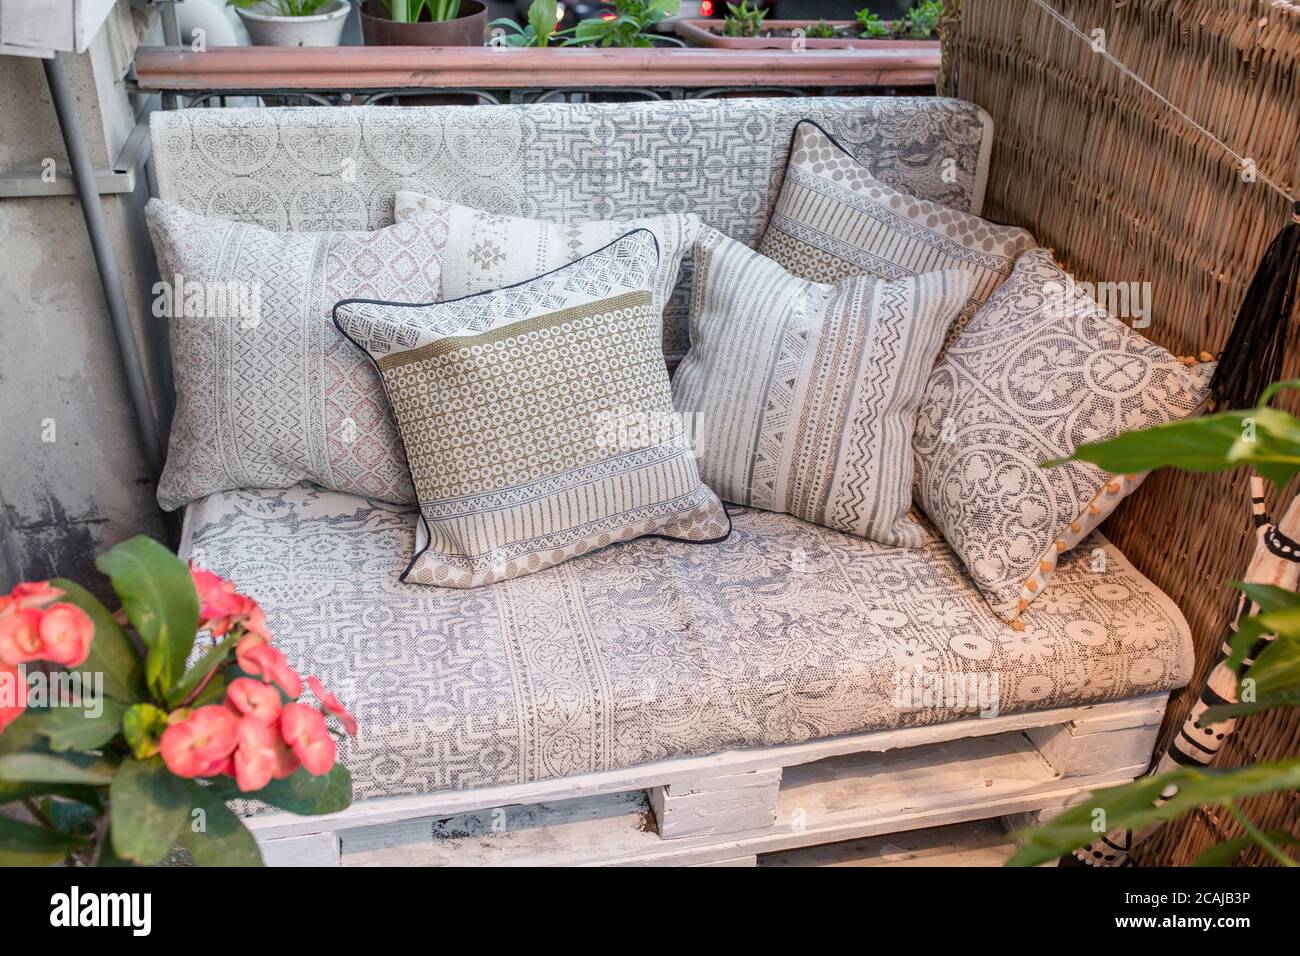 Comfy couch with pillows surrounded by houseplants Stock Photo - Alamy